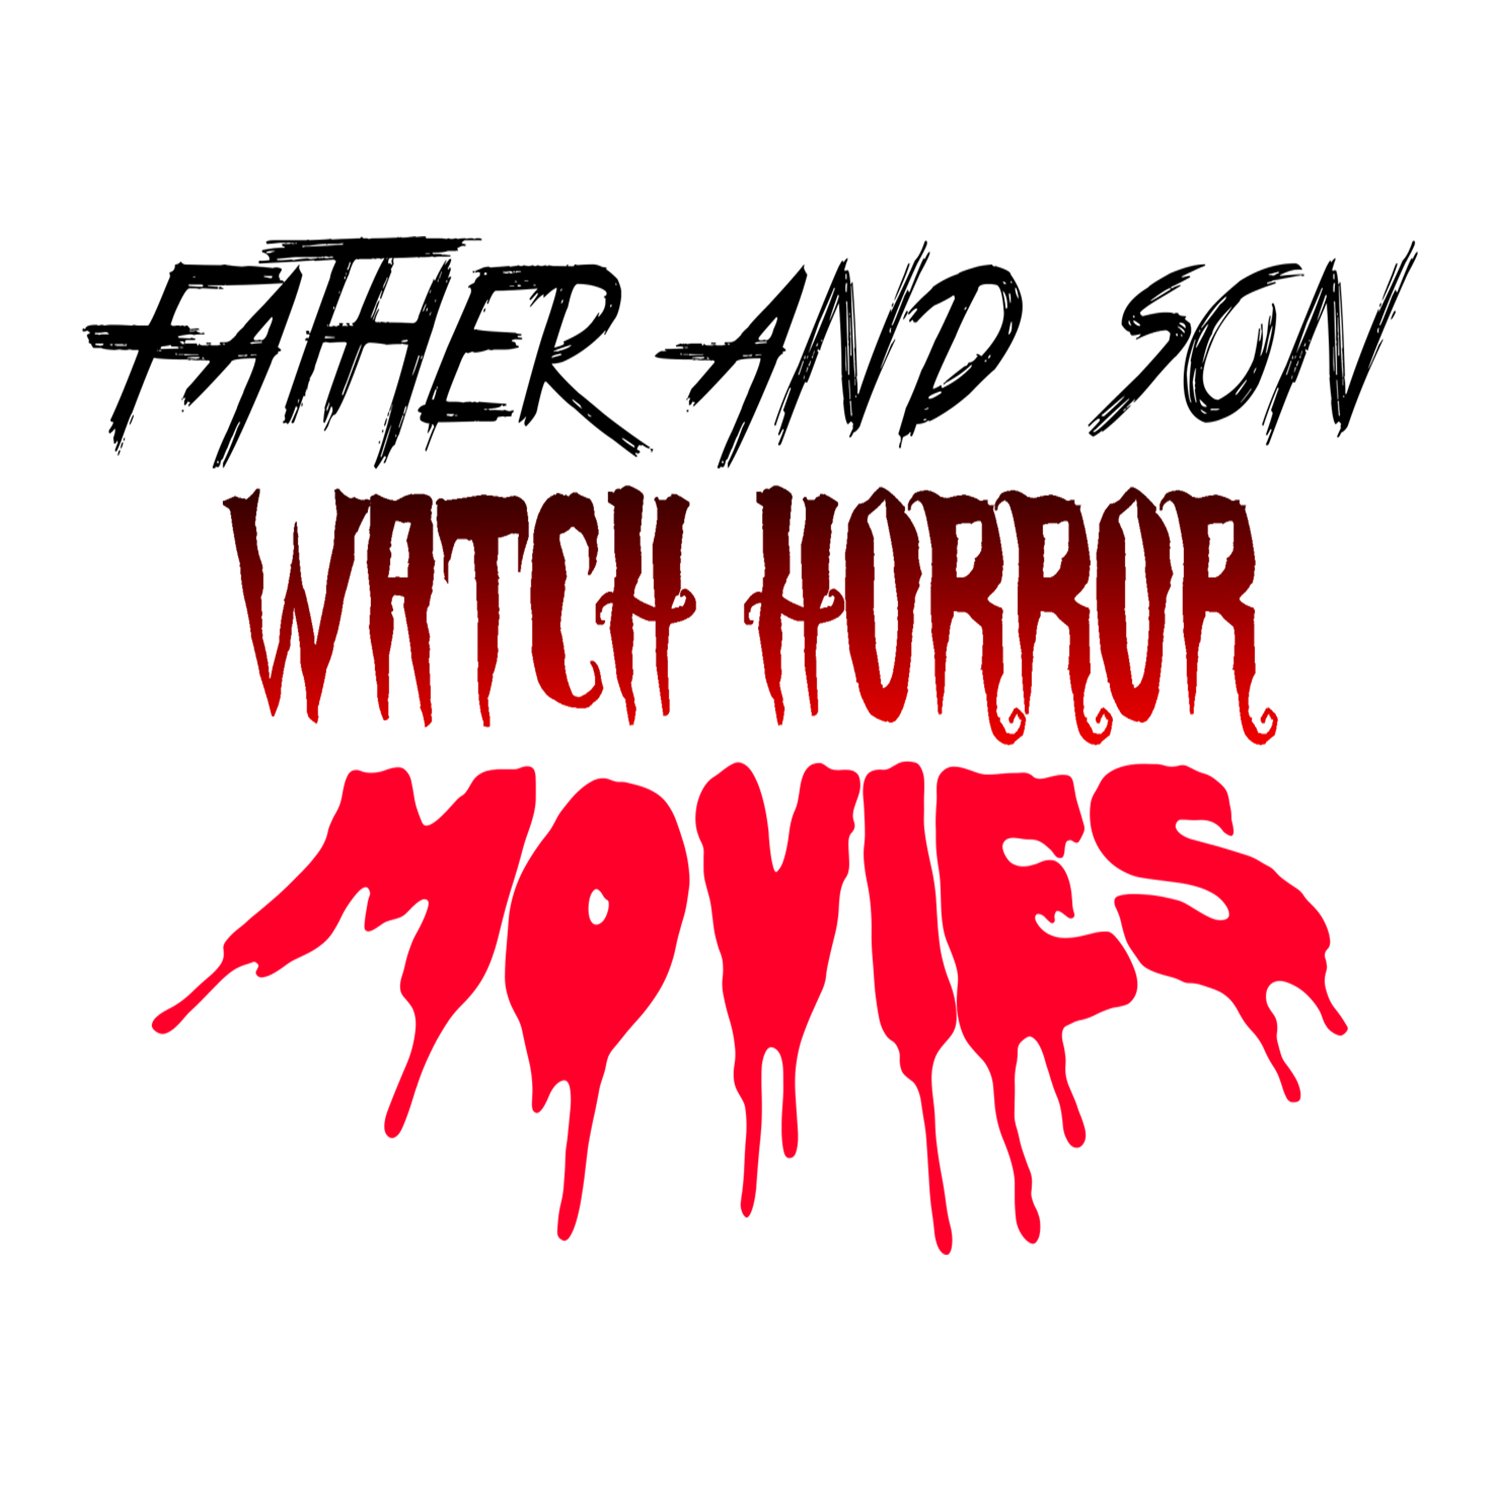 In-depth movie podcast hosted
by two generations of horror fans 
(@PastorMattR & @Kaine_Hero12)
Pod: https://t.co/hTpdjbvbk9
Have a great day! 🍿💀